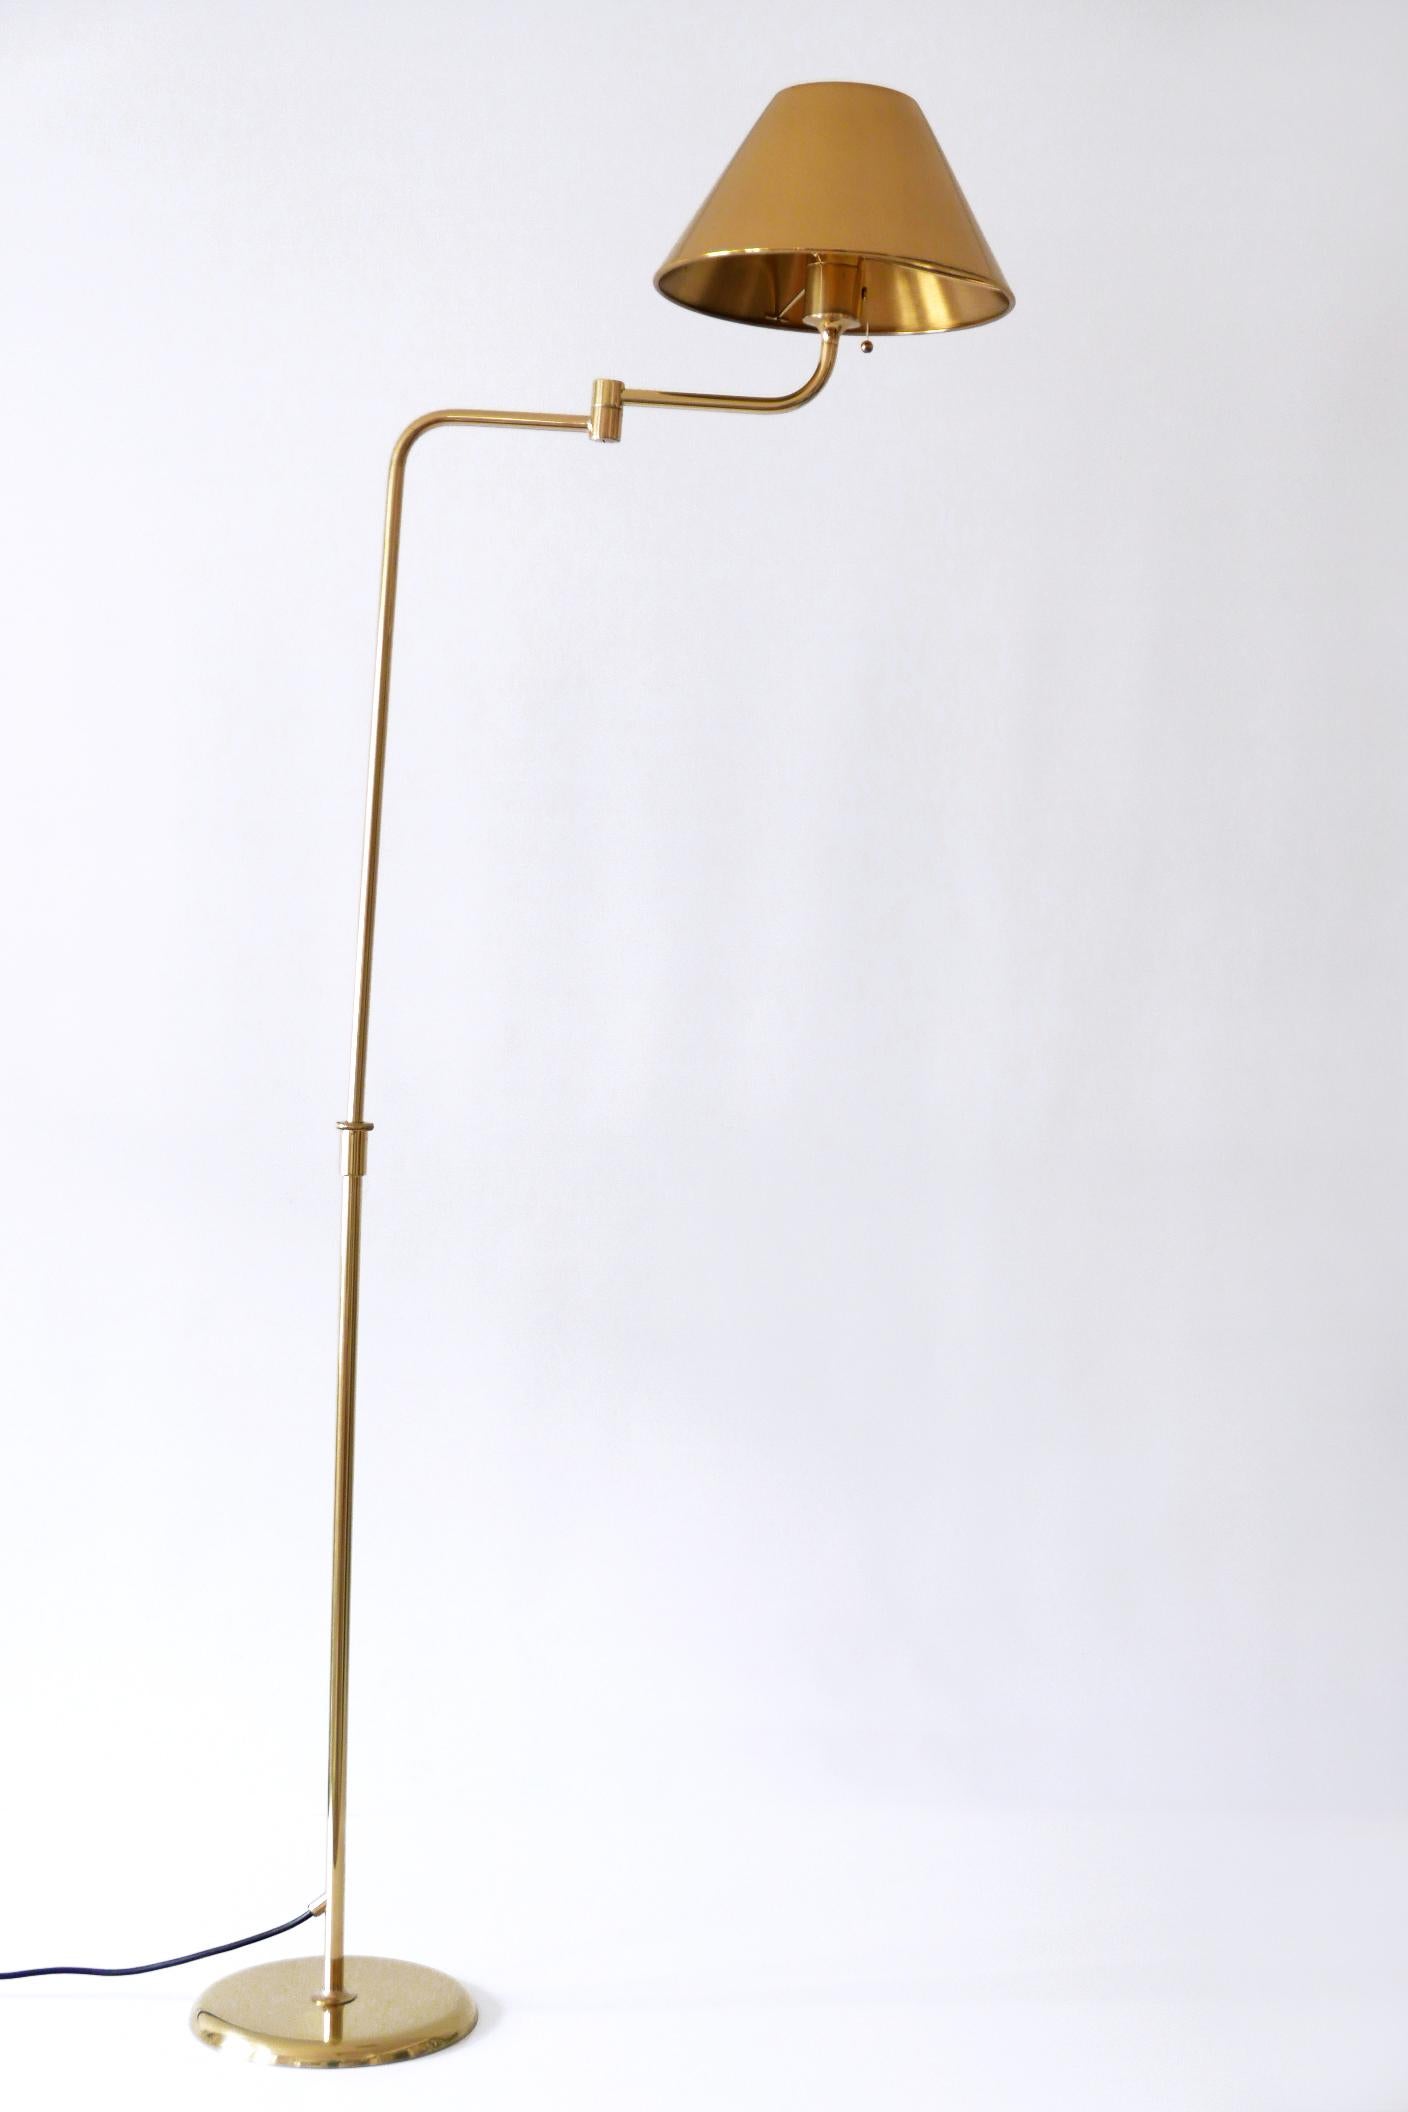 Articulated Brass Floor Lamp or Reading Light by Florian Schulz 1980s Germany 4